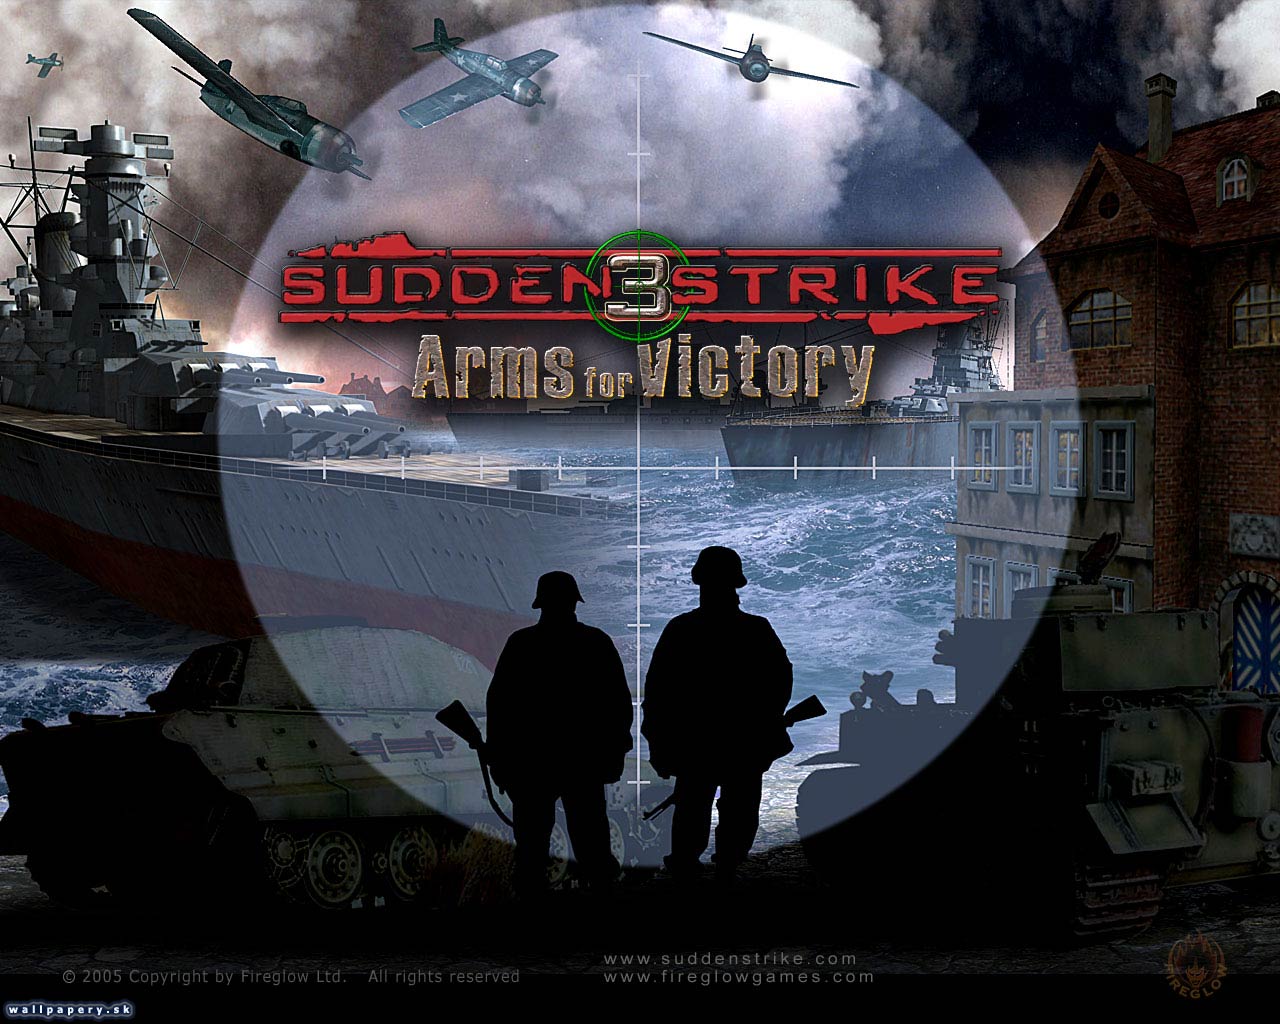 Sudden Strike 3: Arms for Victory - wallpaper 1